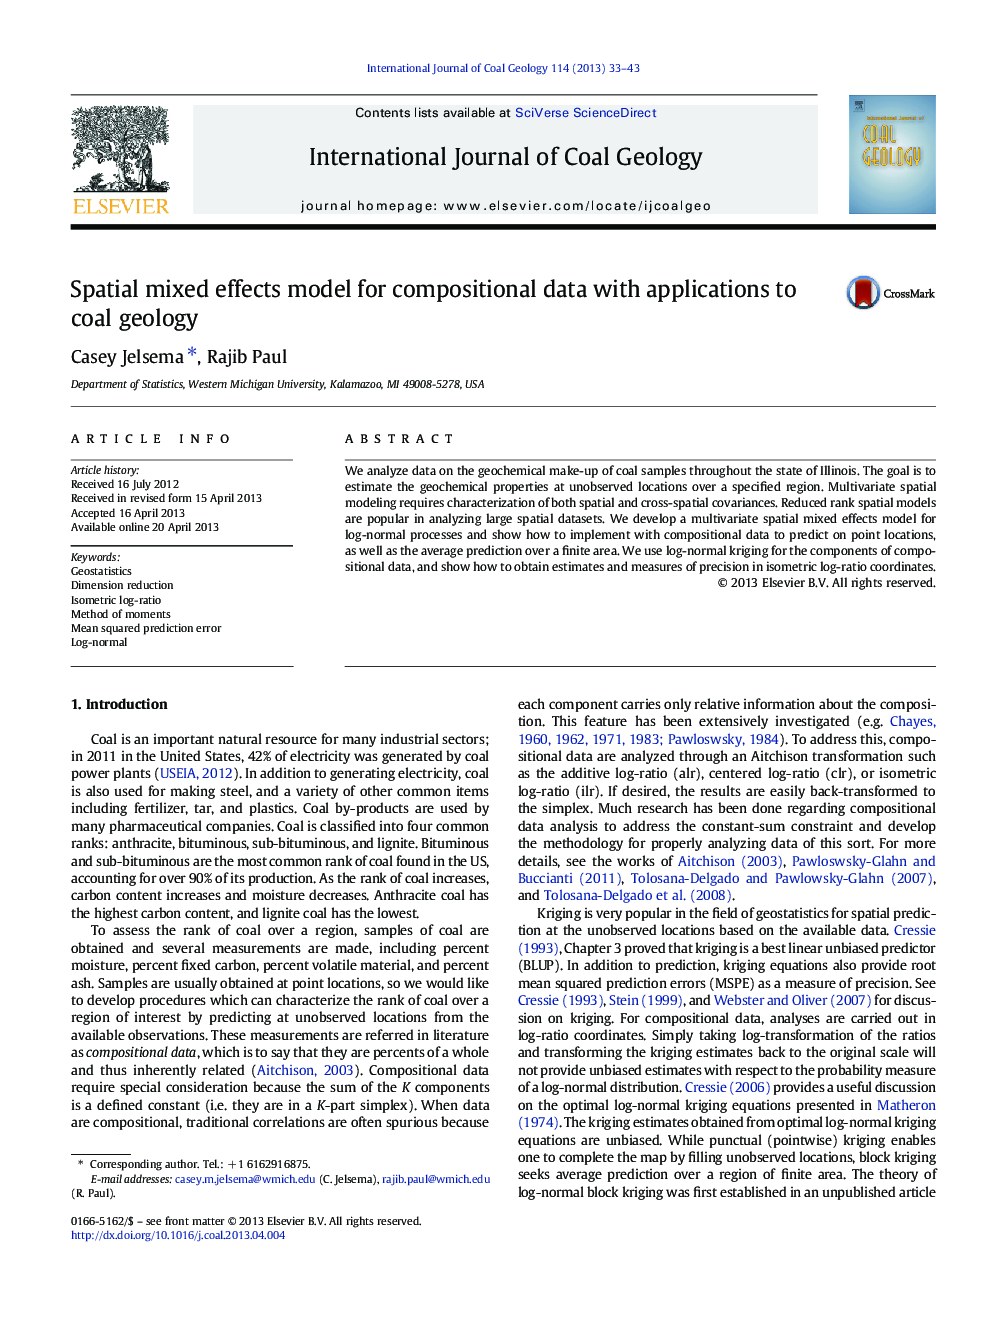 Spatial mixed effects model for compositional data with applications to coal geology